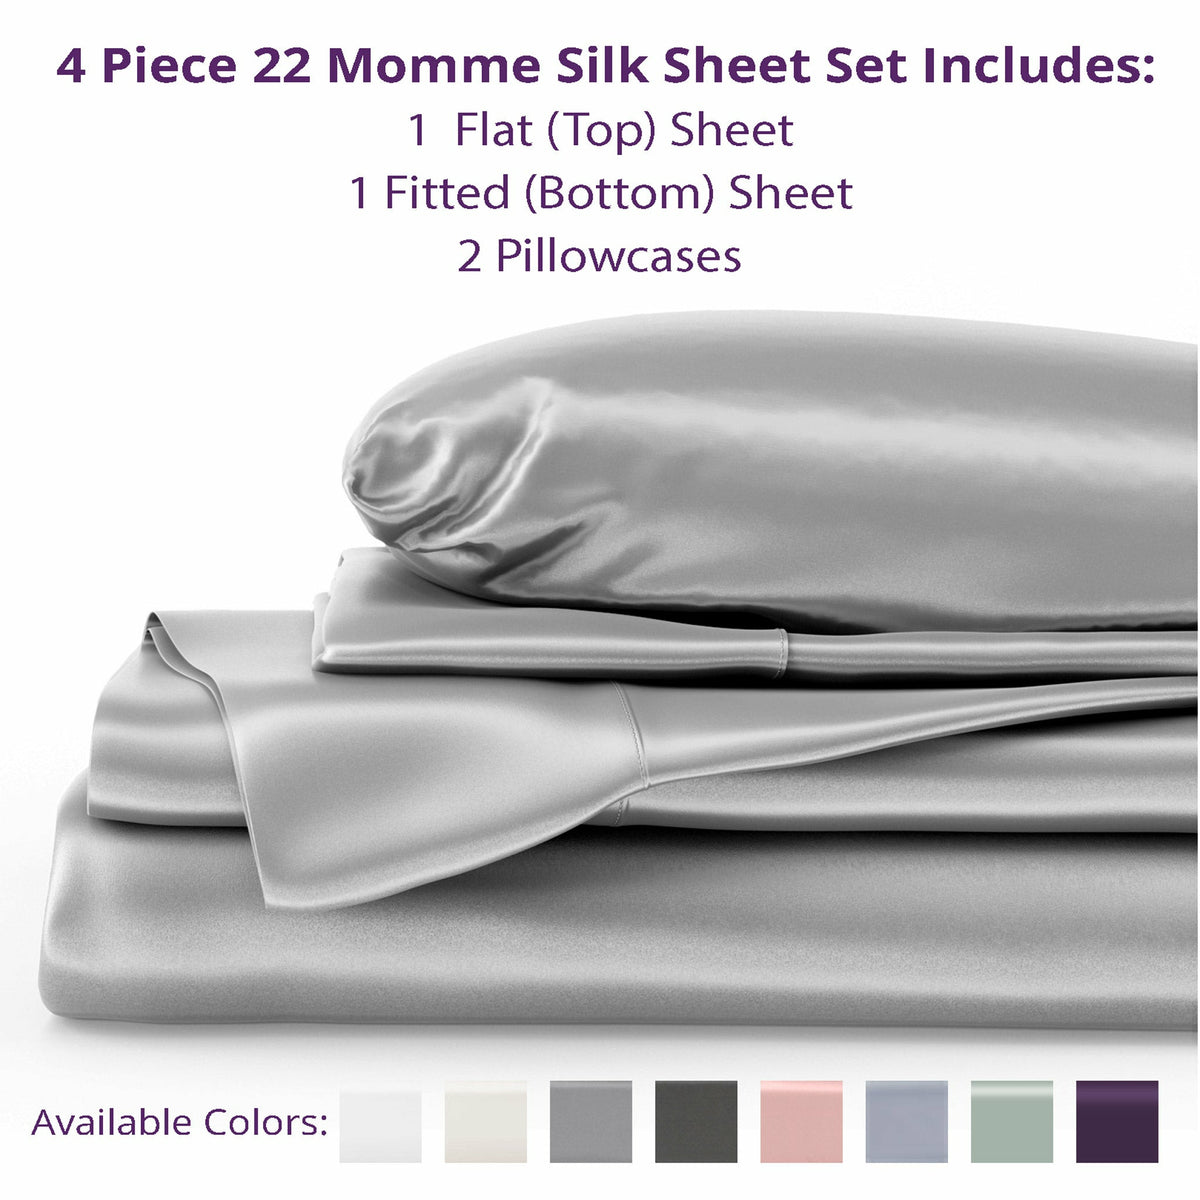 Mulberry Park Silks 22 Momme Silk Flat Sheets Inclusions Silver Fine Linens